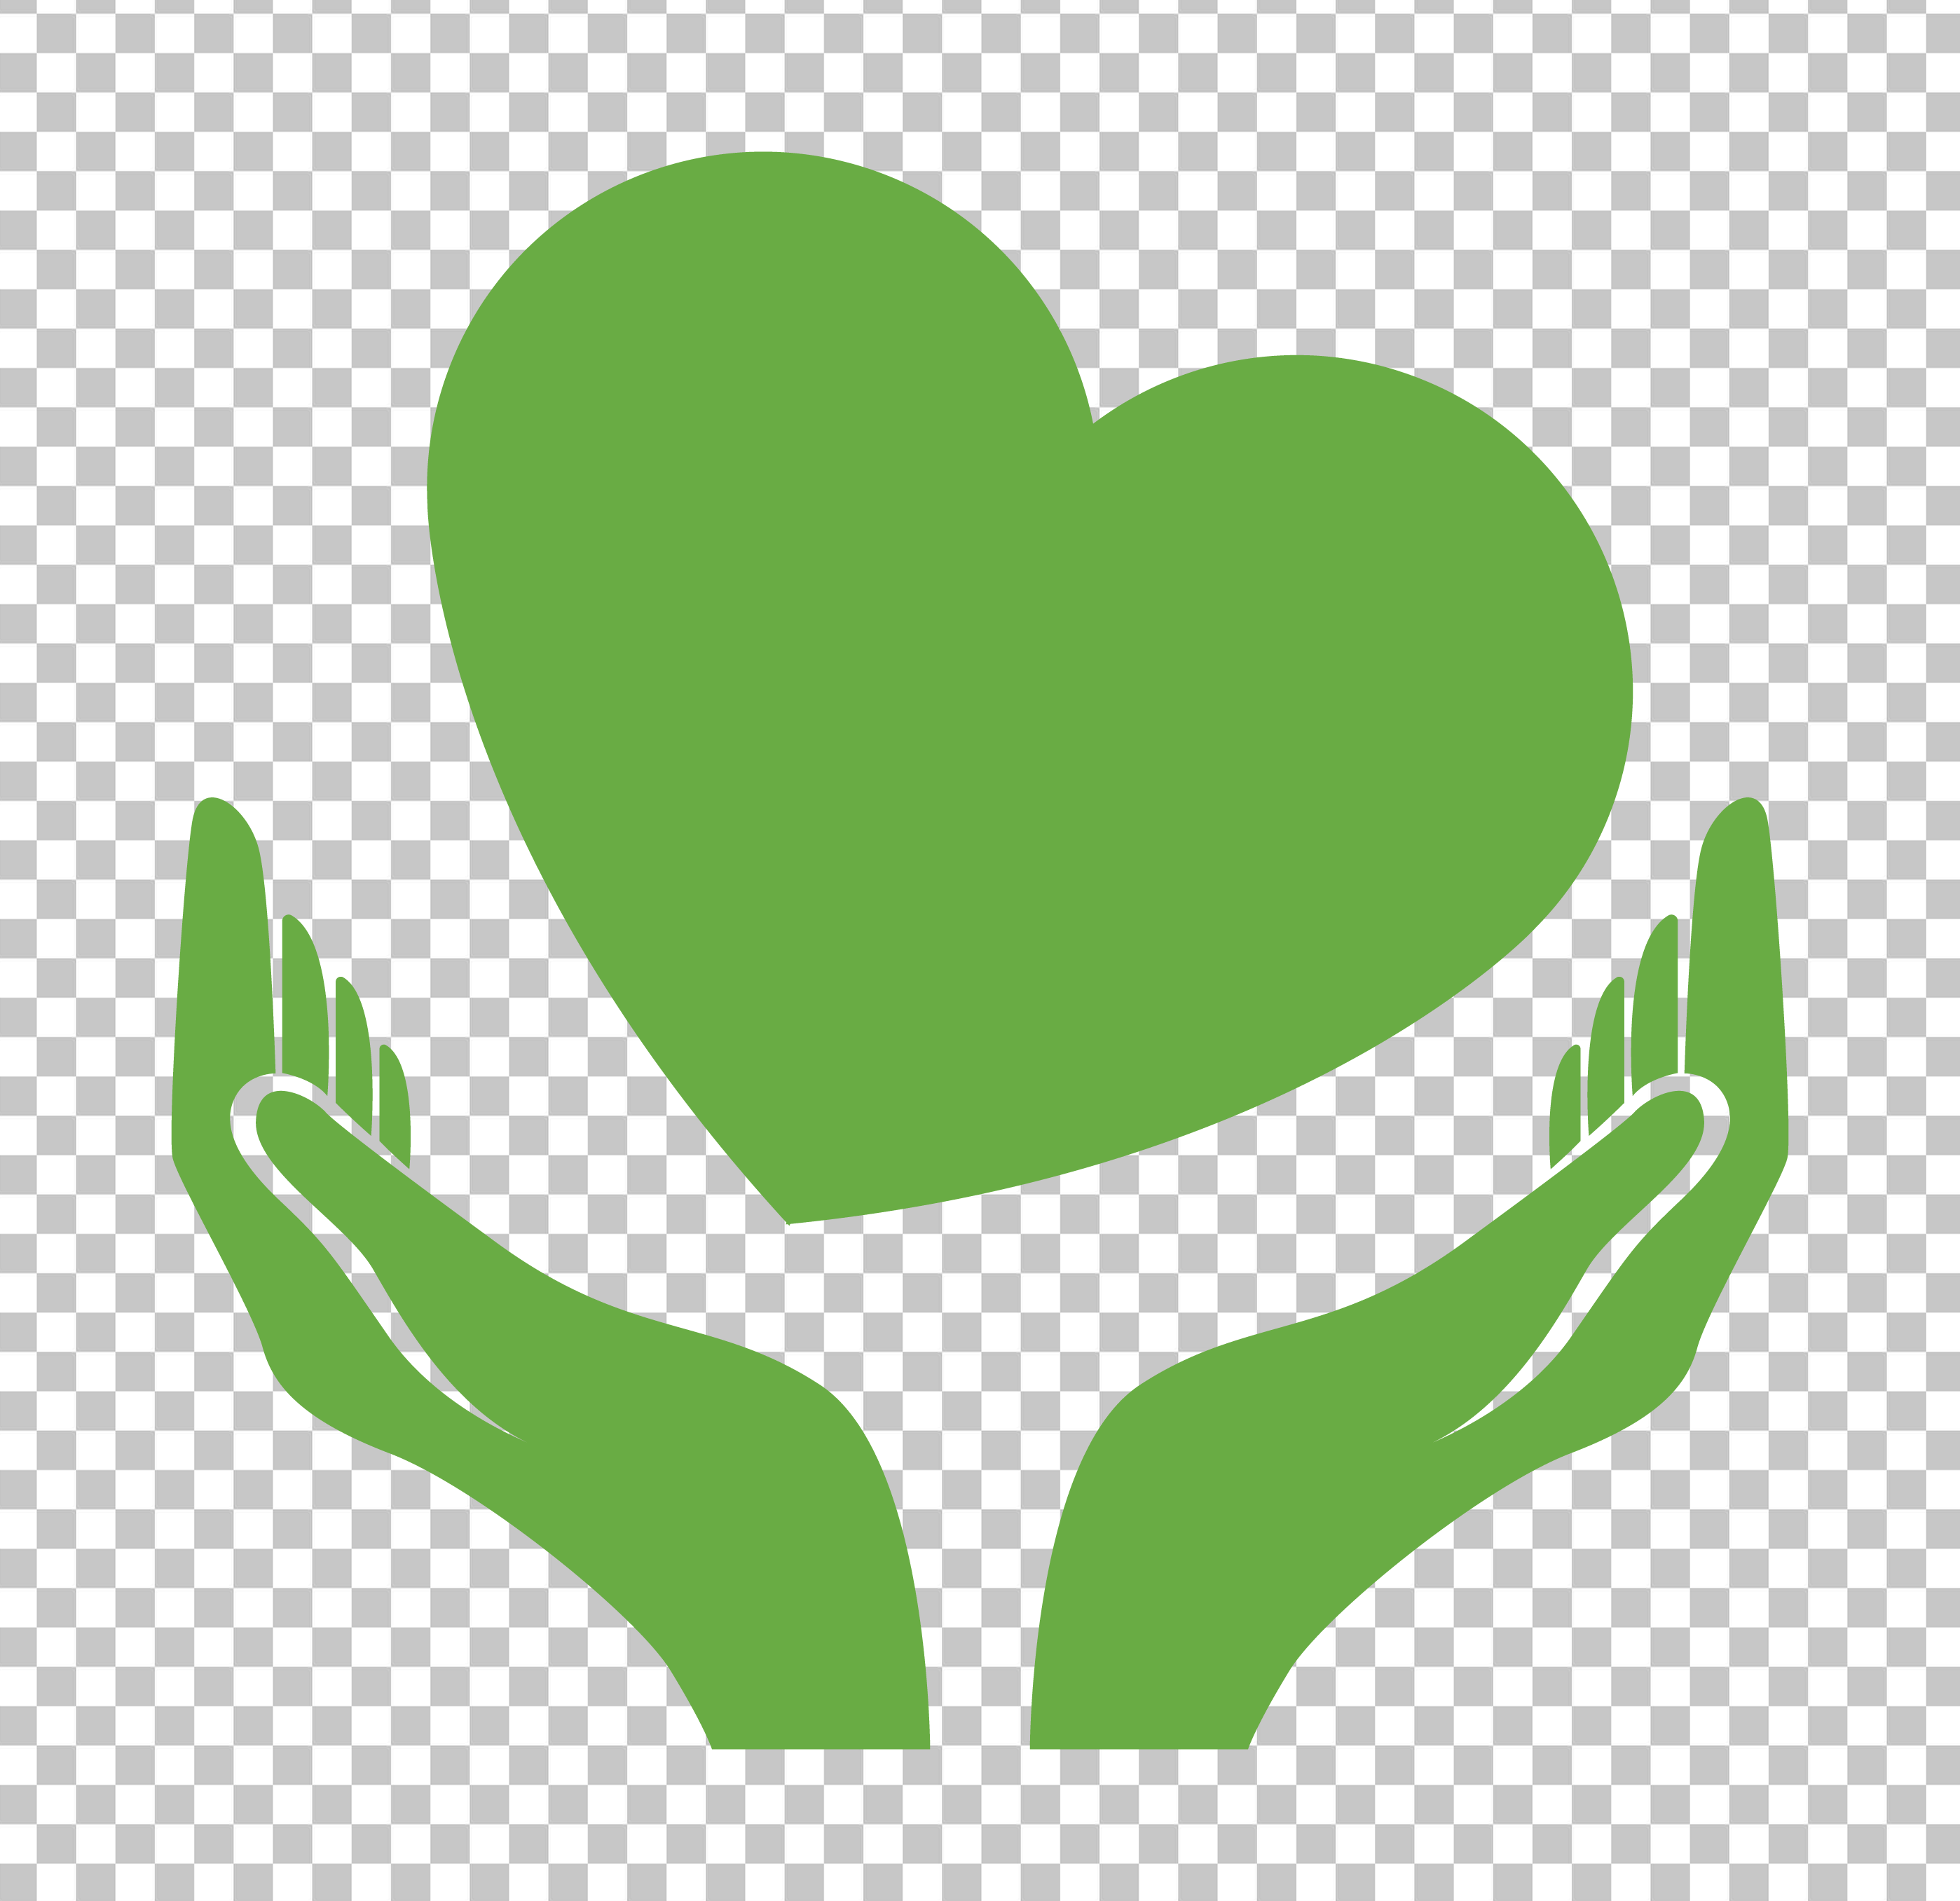 Two Hands Holding Green Heart PNG Image